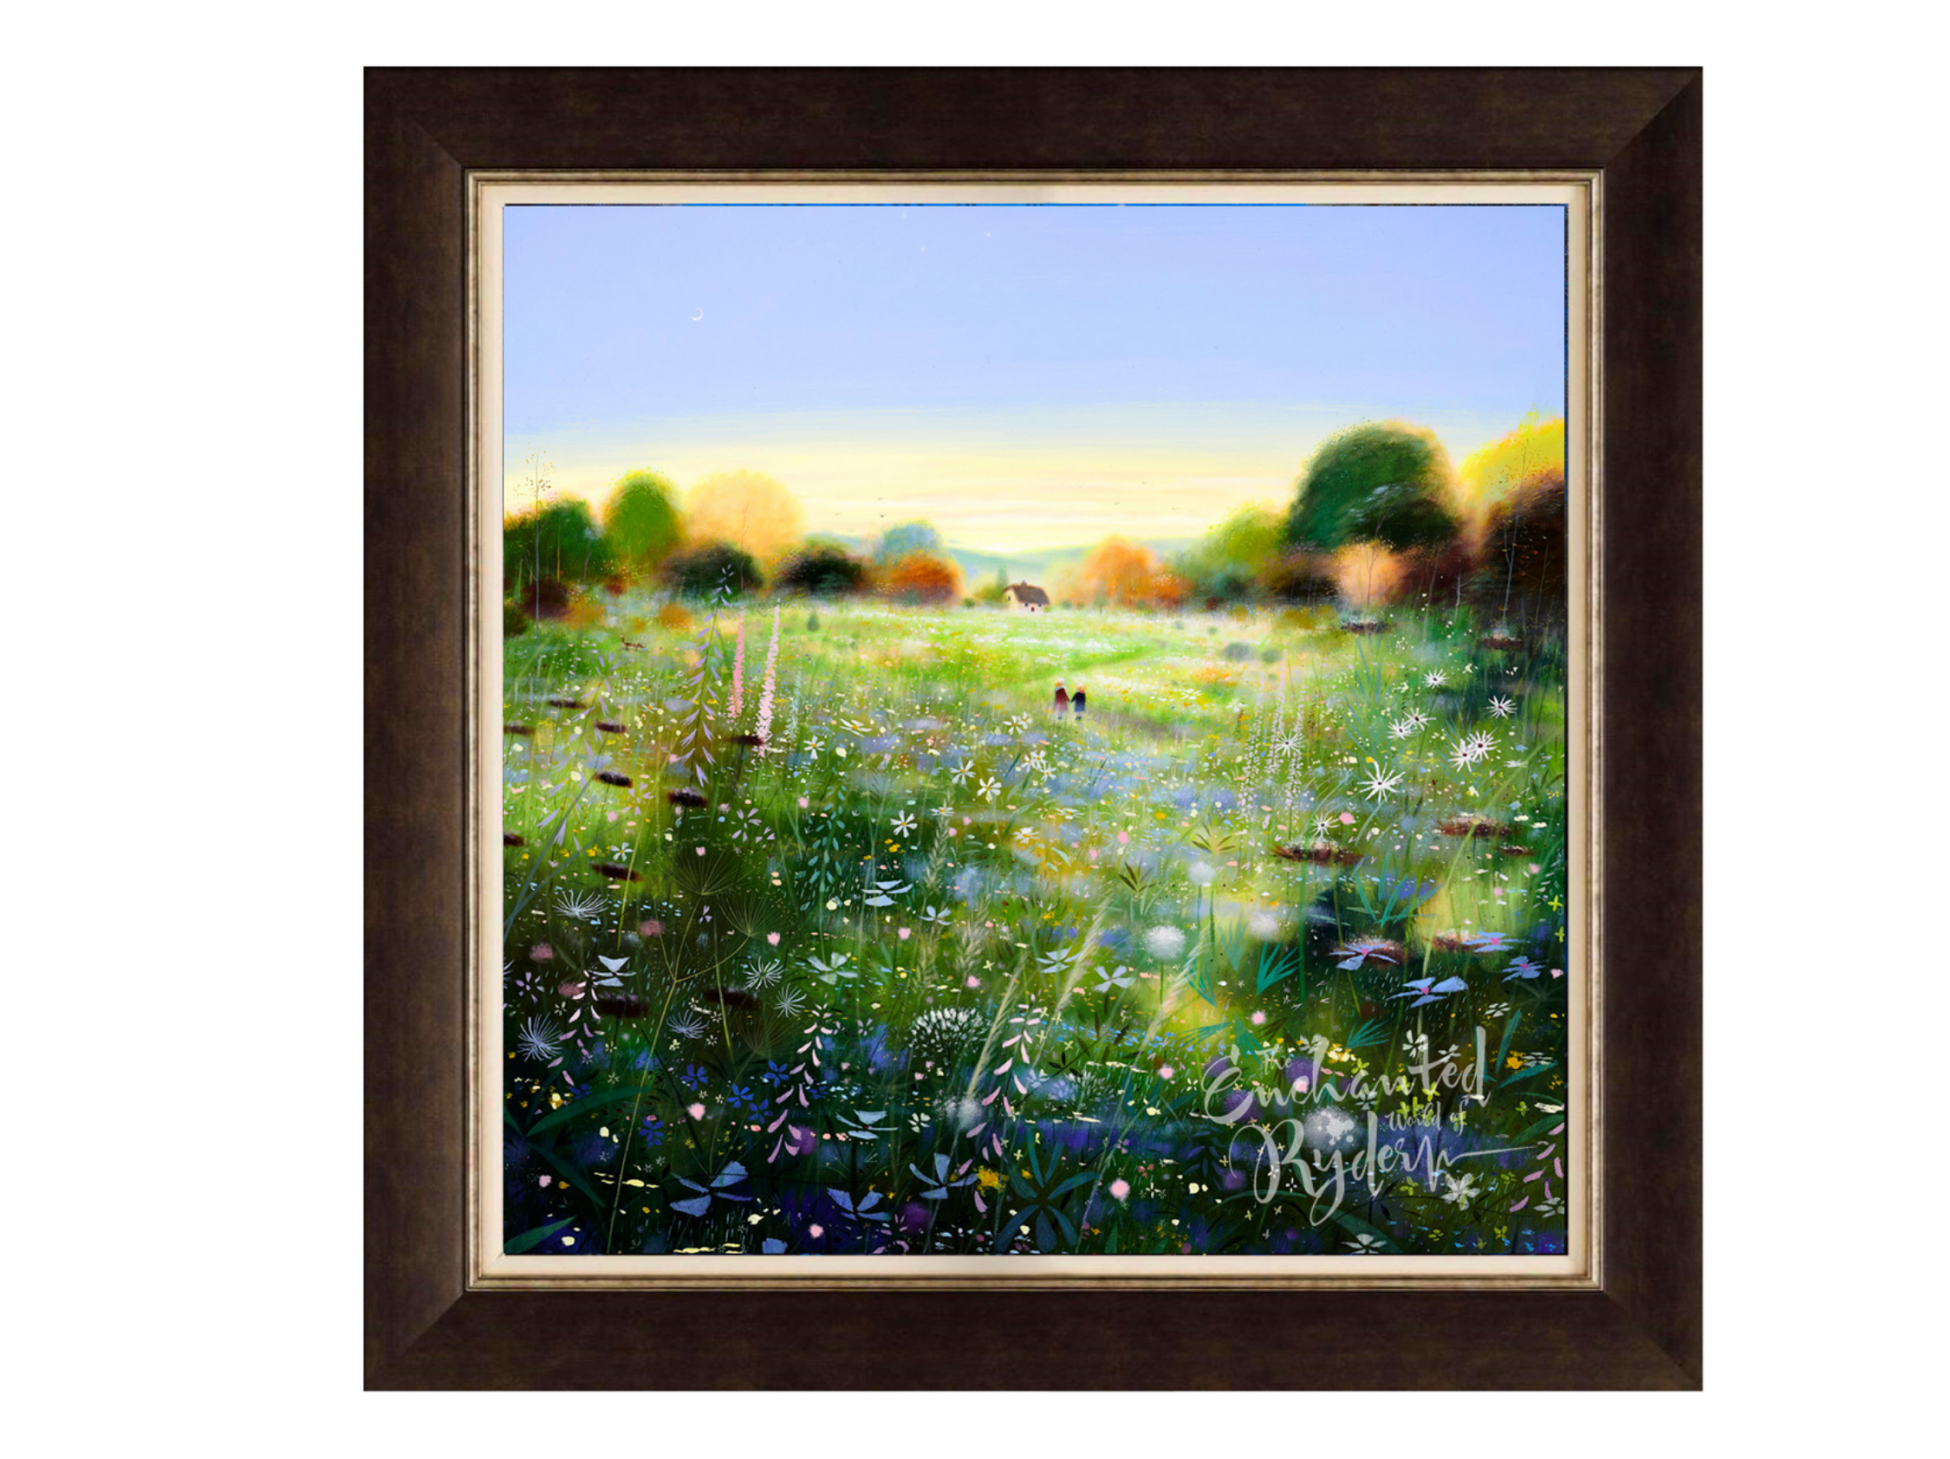 Ryder - 'The Last Of The Summer Bloom' - Framed Limited Edition Art